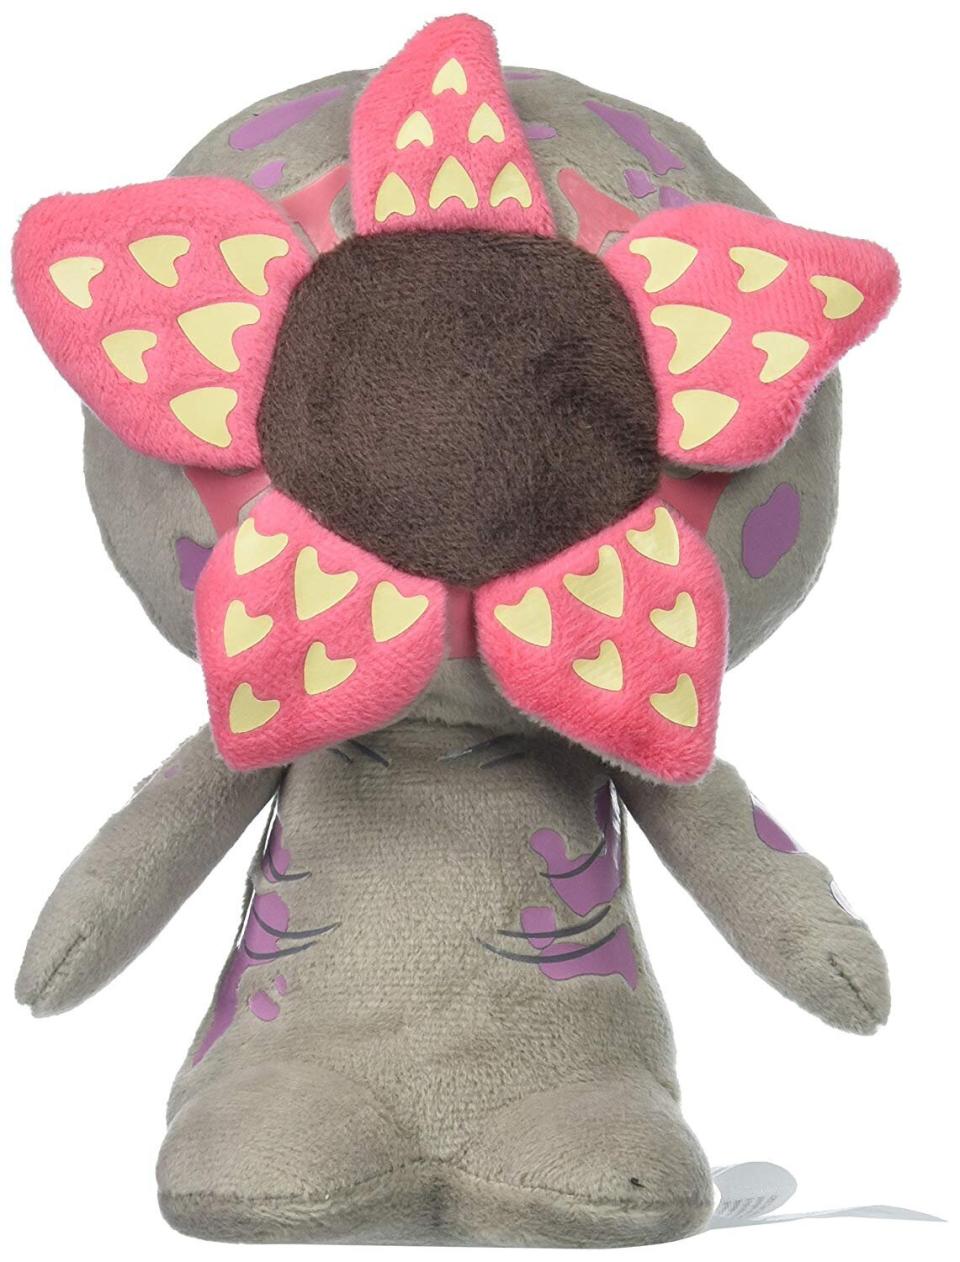 All the better to snuggle with during the long Season 3 binge. <strong><a href="https://www.amazon.com/Funko-Supercute-Plush-Demogorgon-Collectible/dp/B0759HQHHY/ref?tag=thehuffingtop-20" target="_blank" rel="noopener noreferrer">Find it on Amazon.</a></strong>